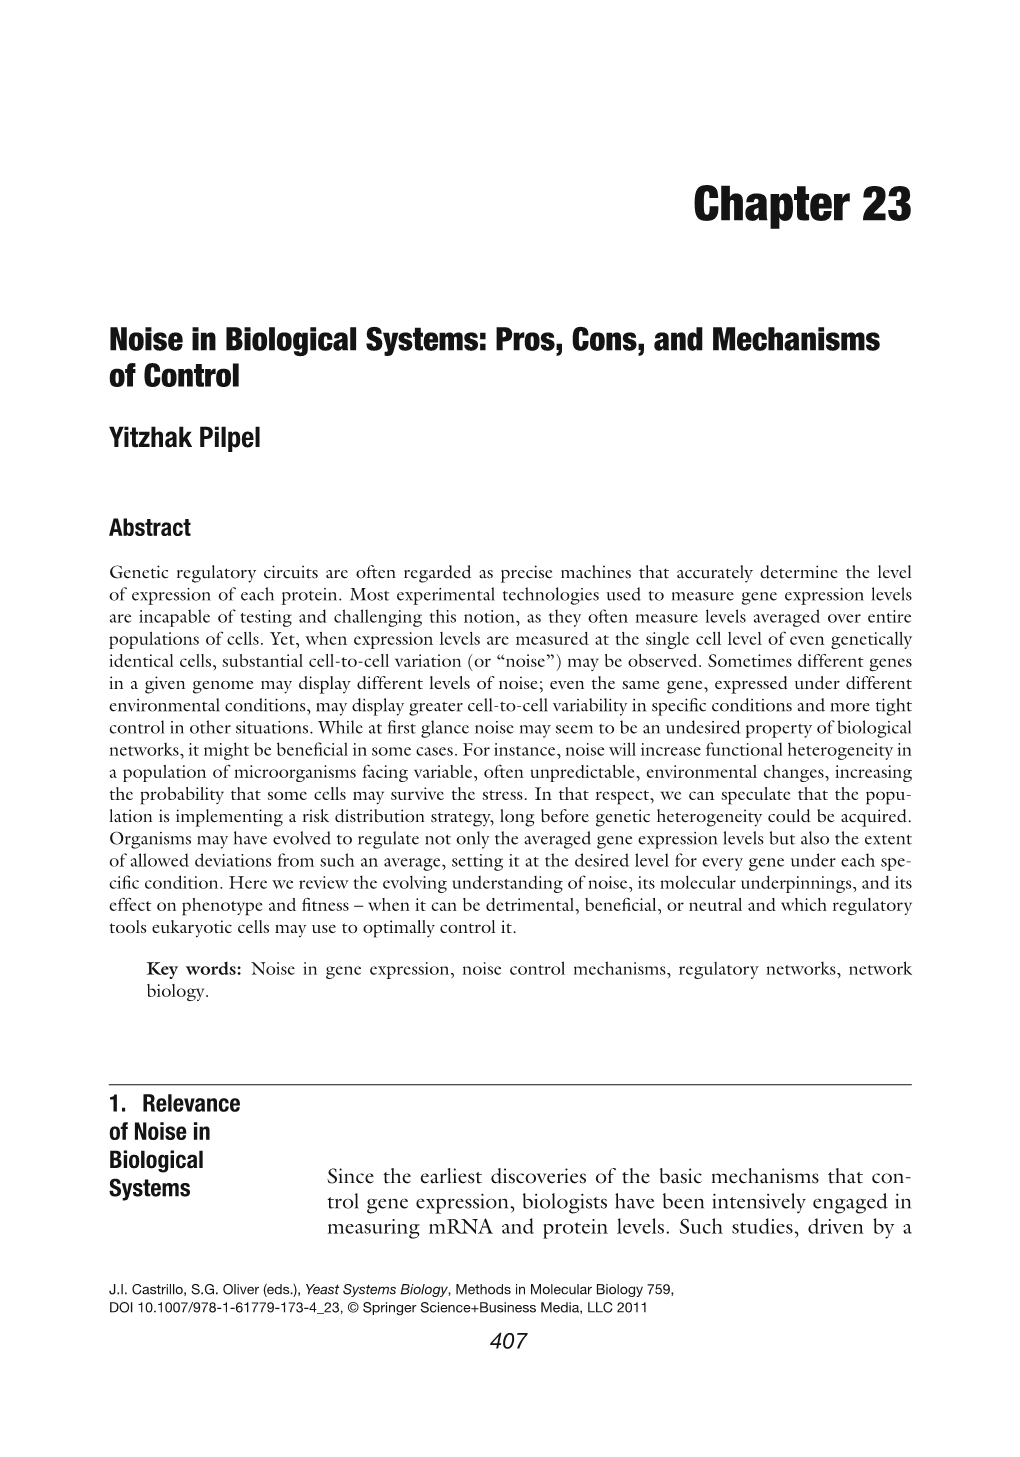 Noise in Biological Systems: Pros, Cons, and Mechanisms of Control